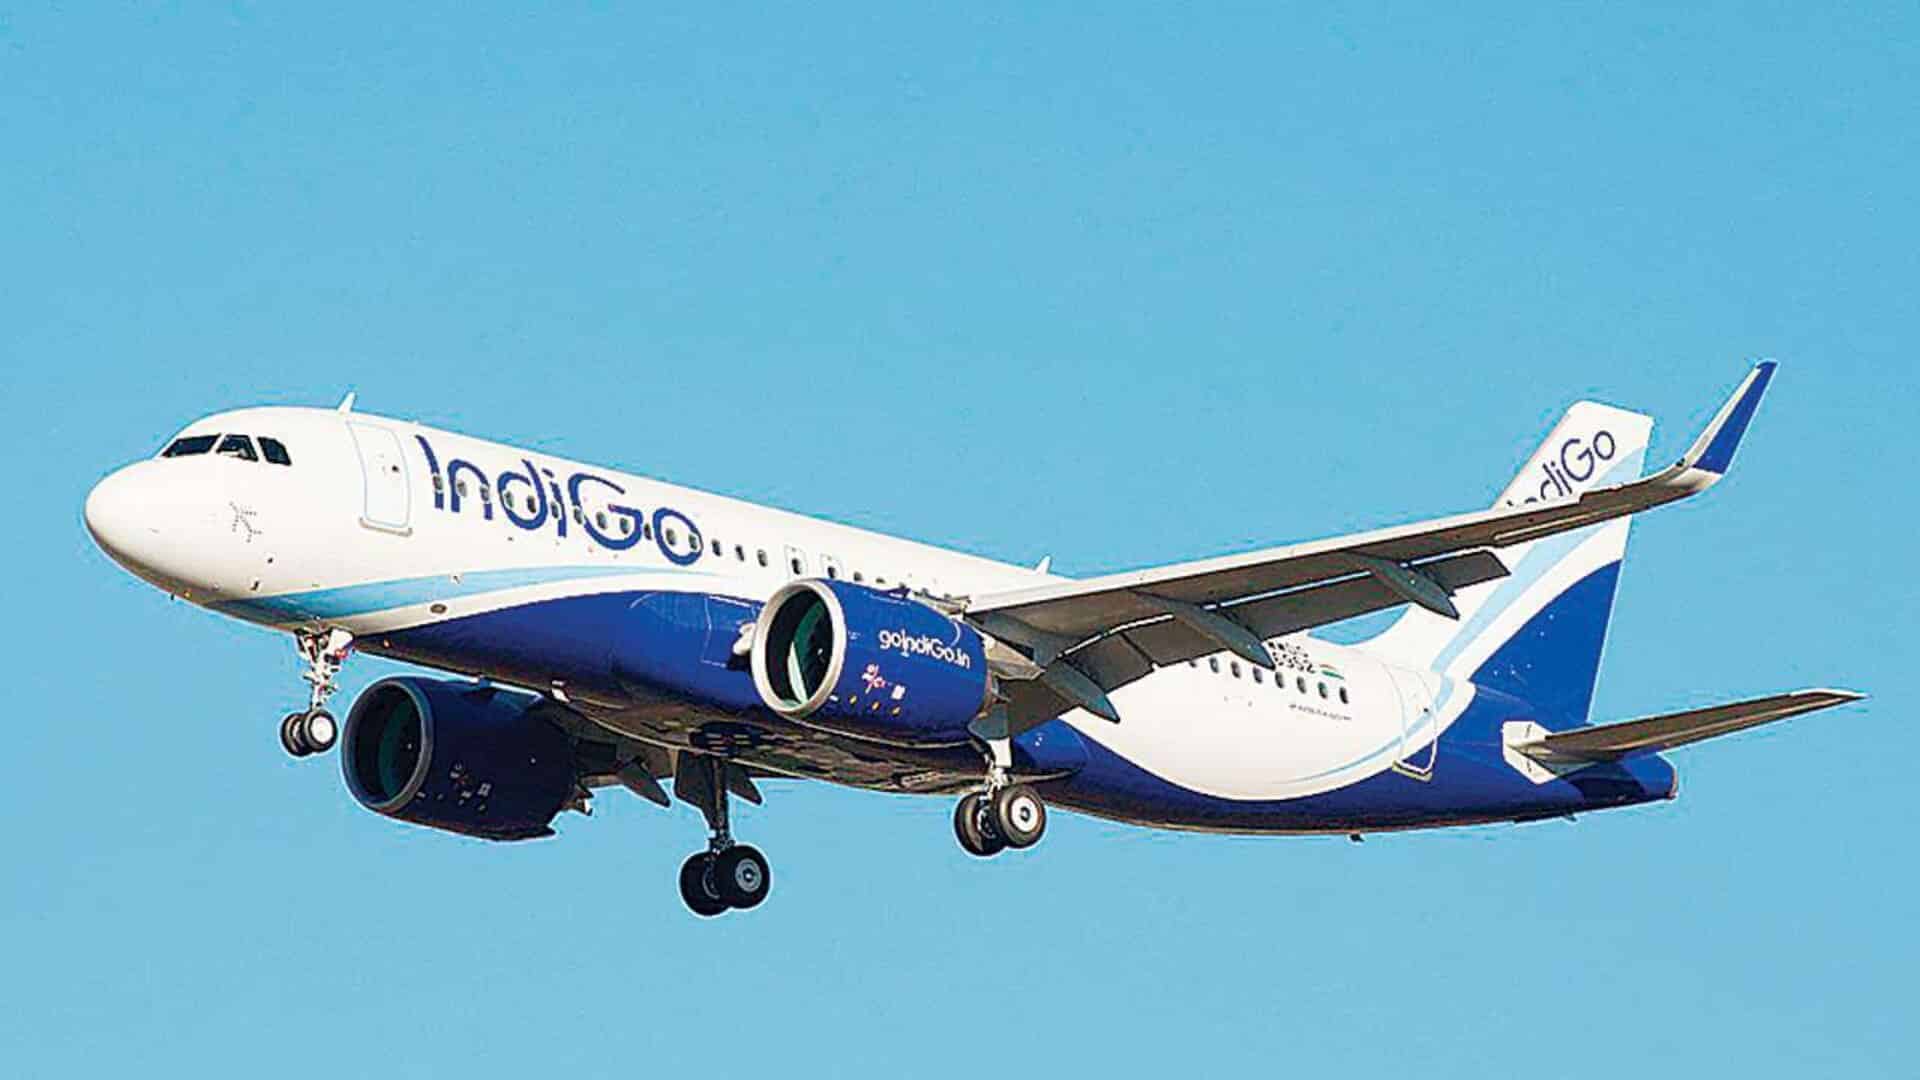 IndiGo ready for swift competition as industry opens to more flyers post-COVID